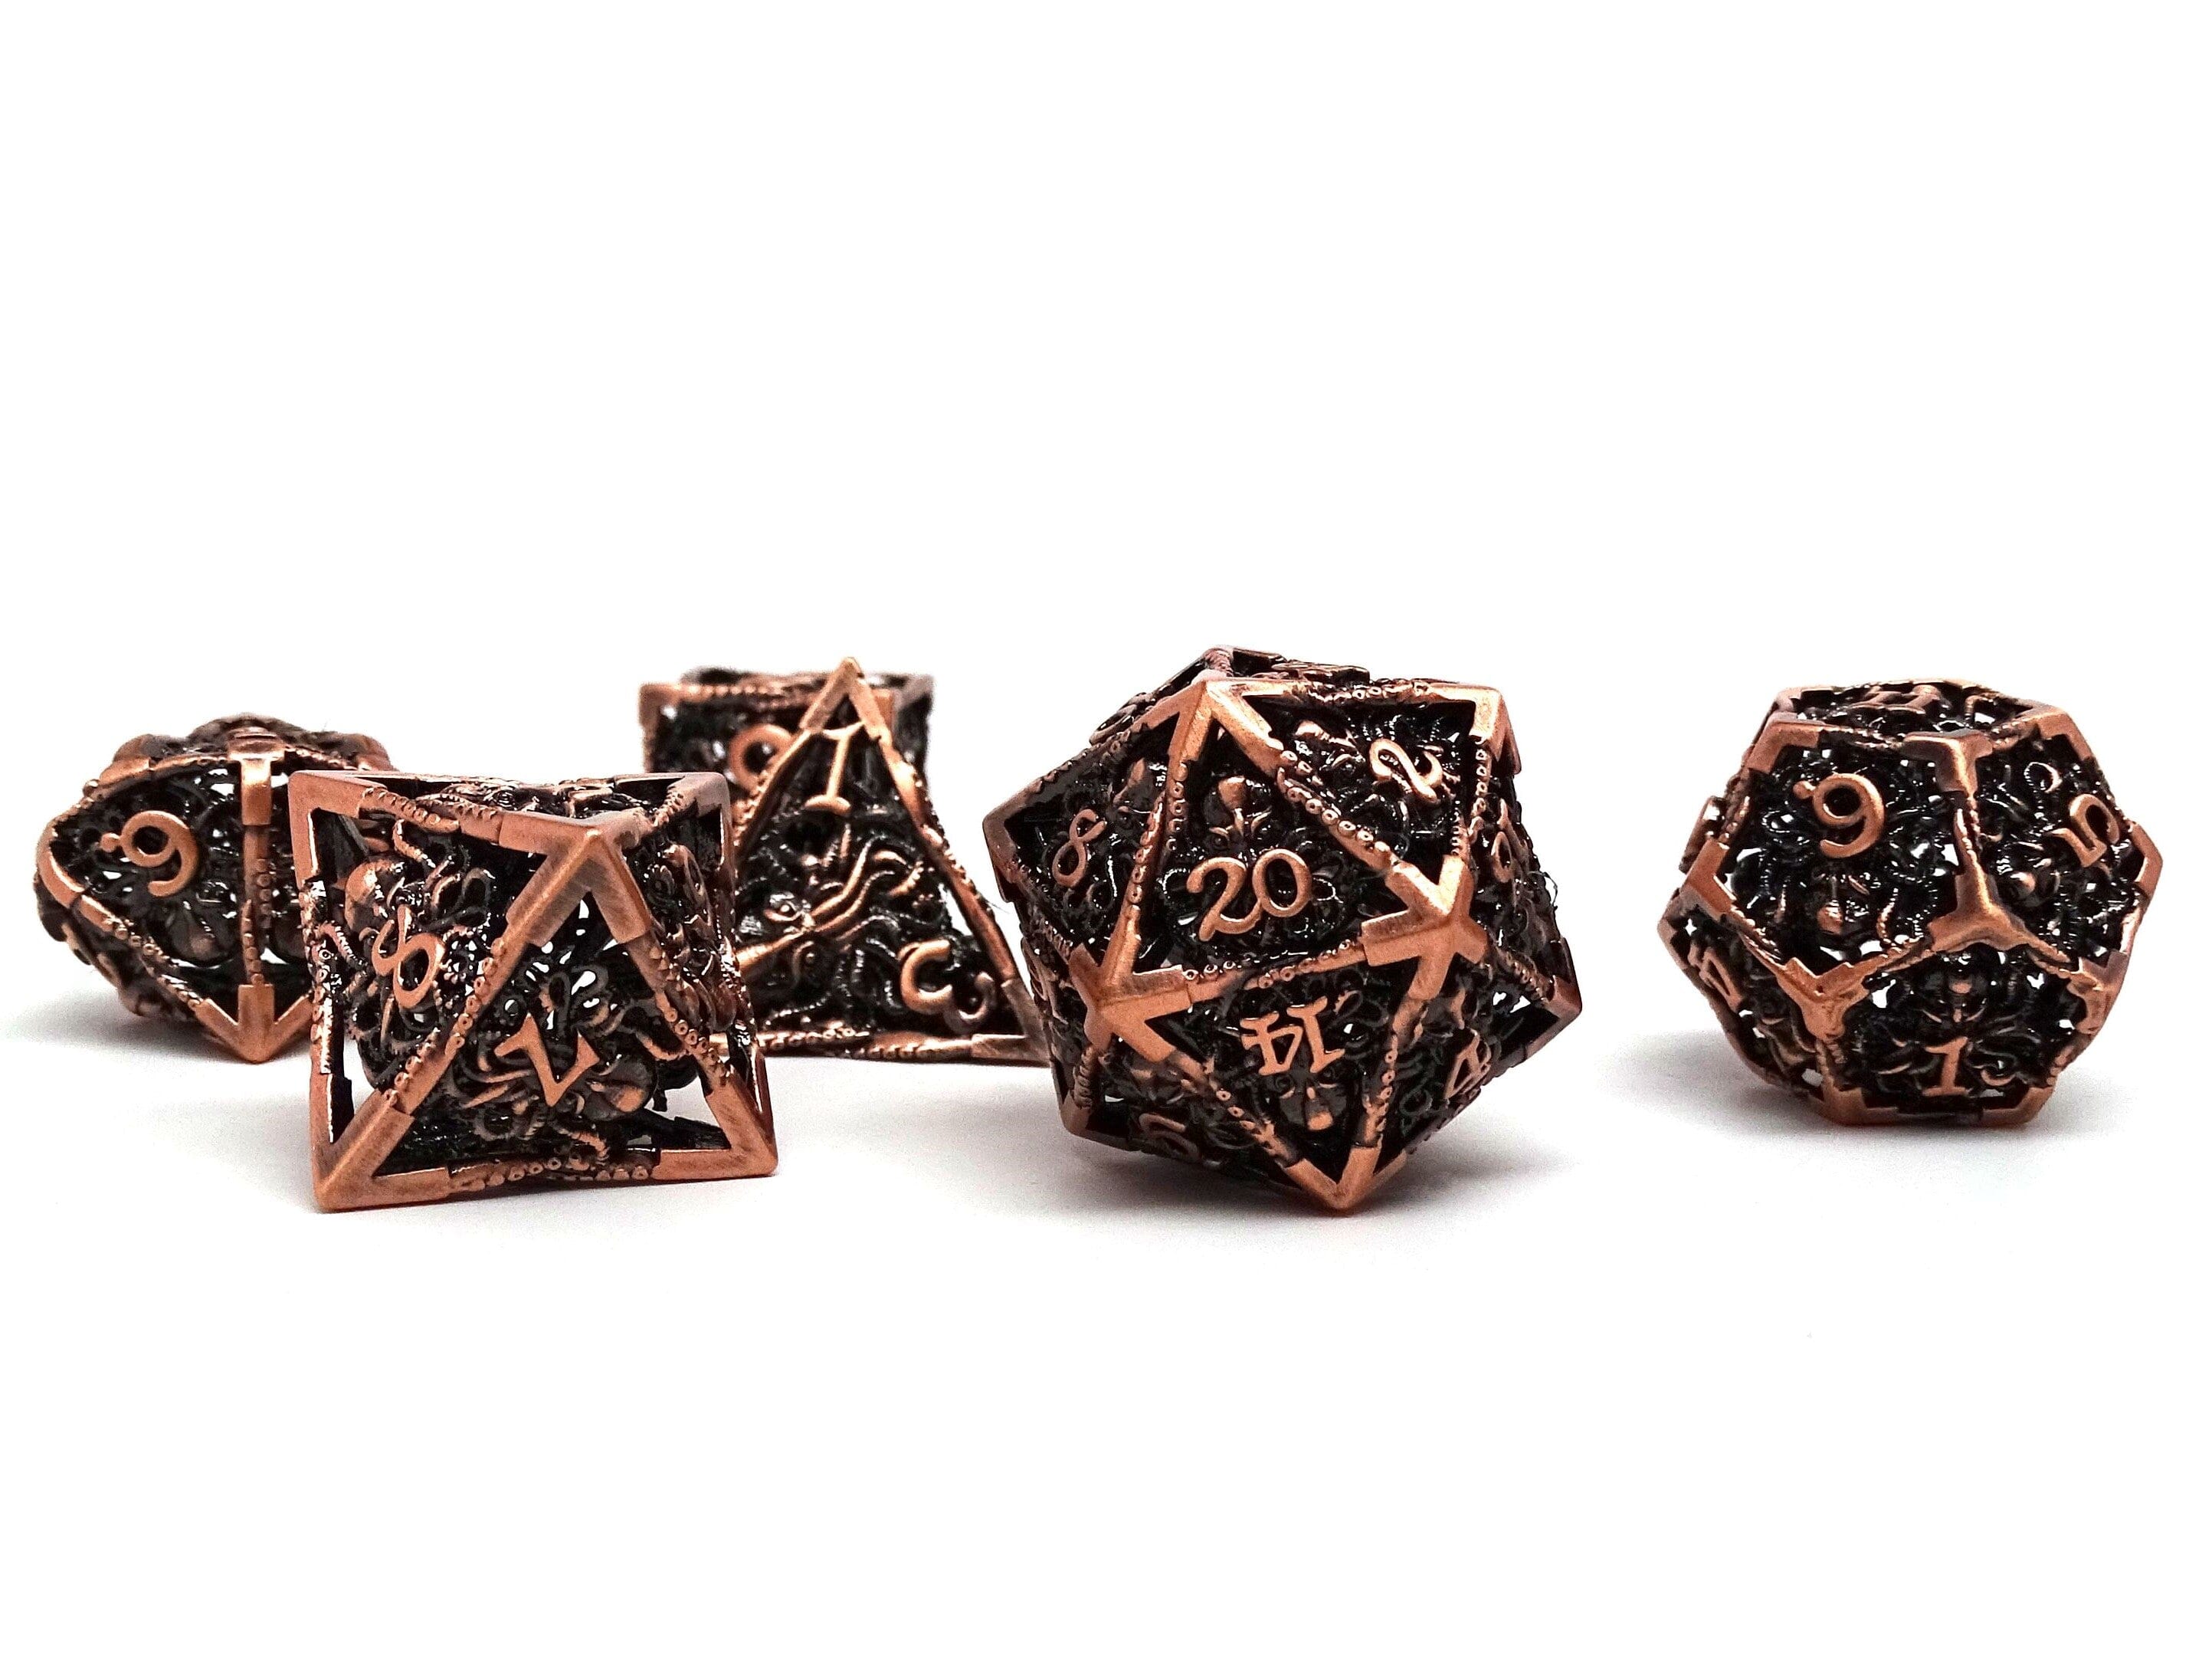 Hollow Metal Copper Cthulhu Dice Set